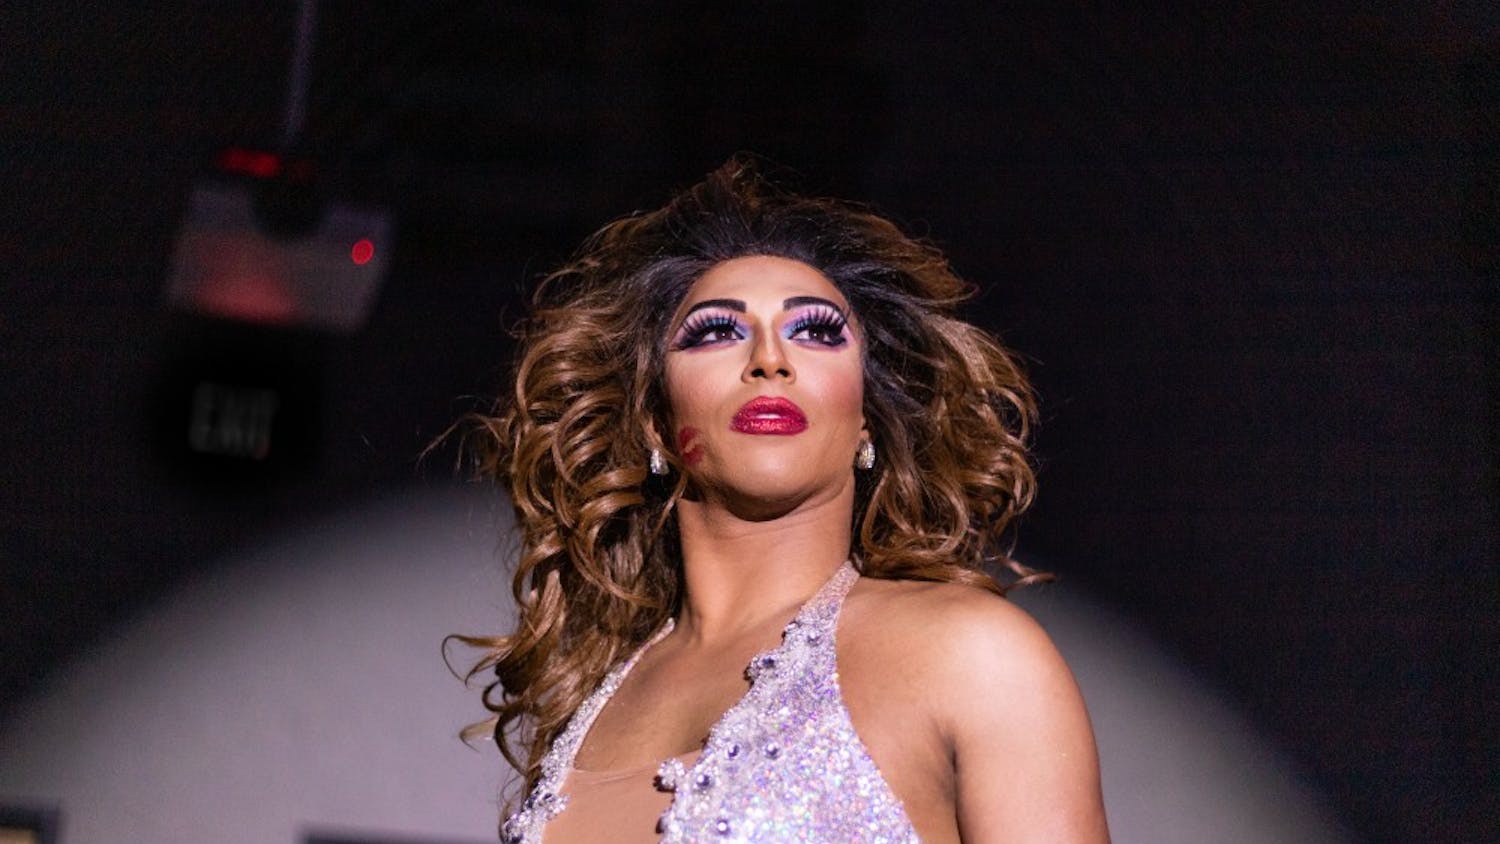 &nbsp;Drag Queen Shangela from RuPaul’s Drag Race performs onstage in the Russell House Ballroom during the annual Birdcage event in 2018.